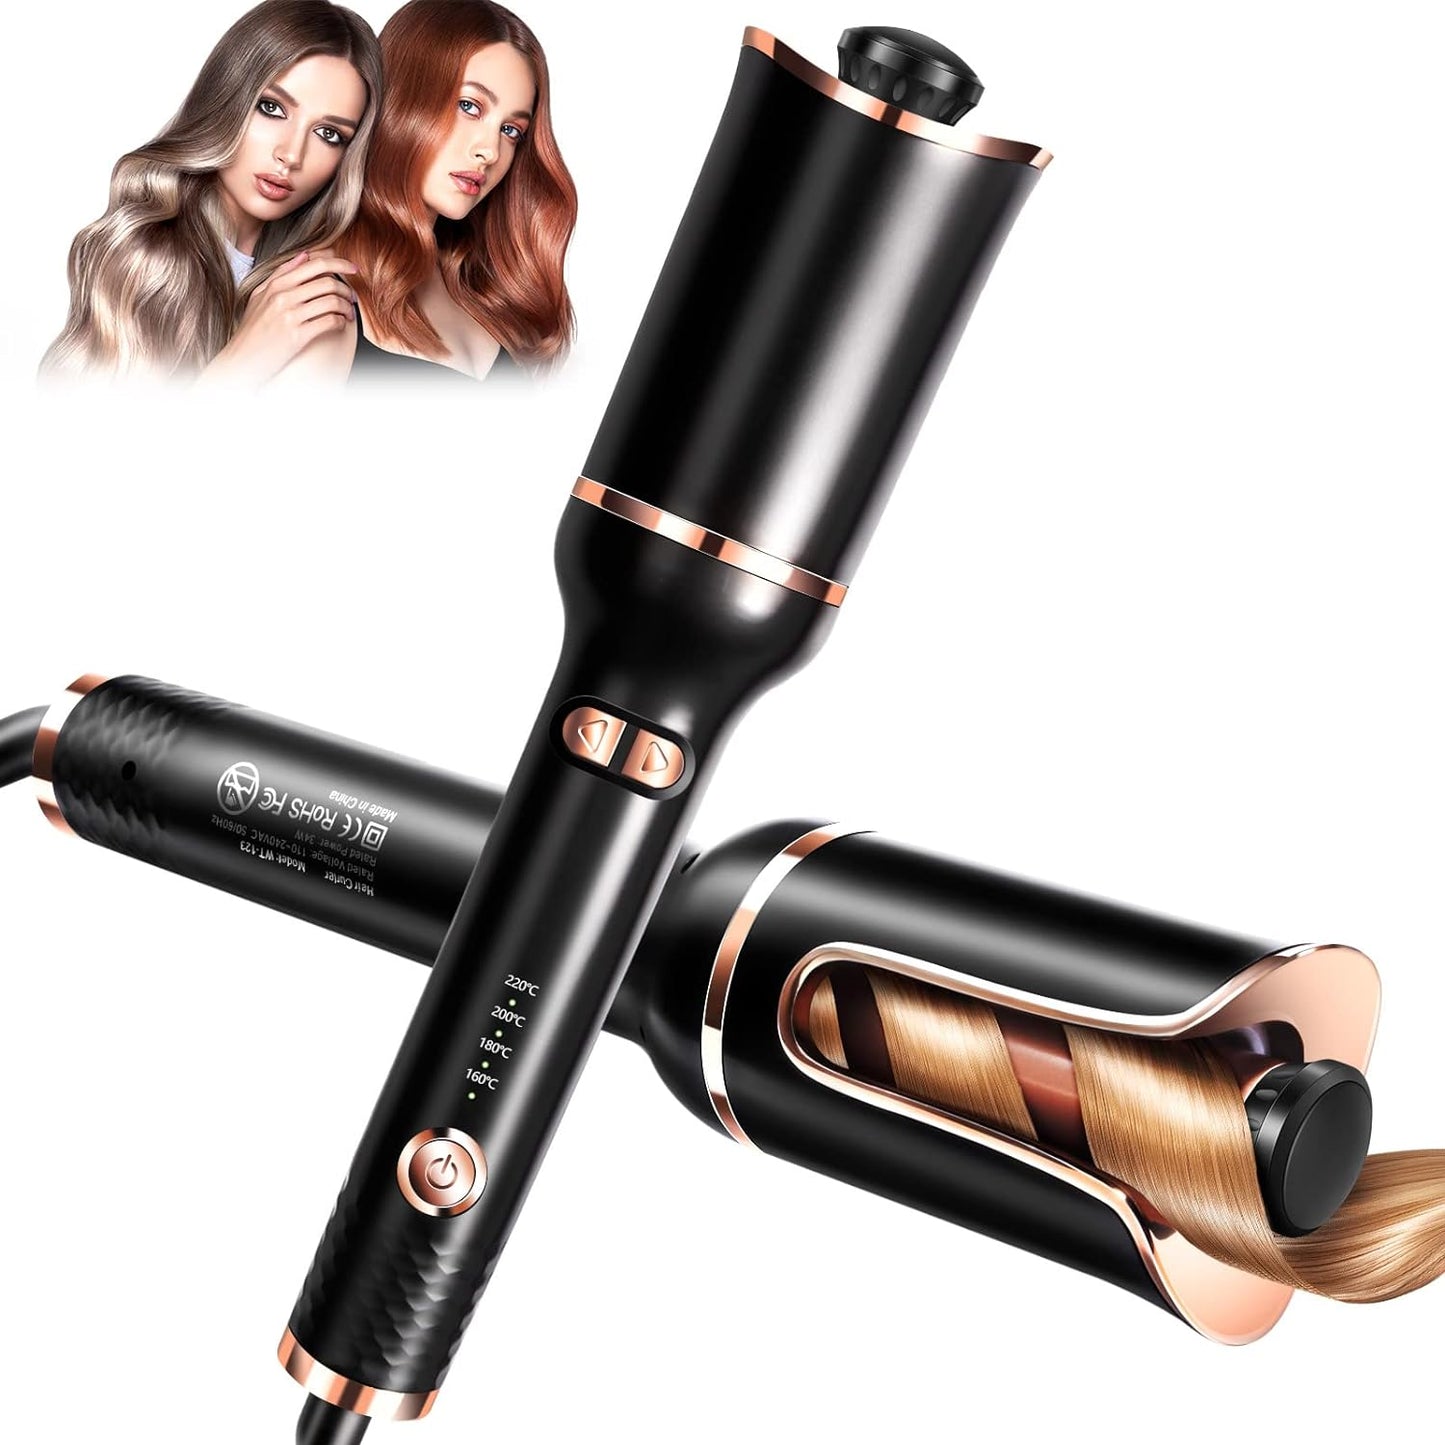 CurlEase™ - Automatic Hair Curling Iron